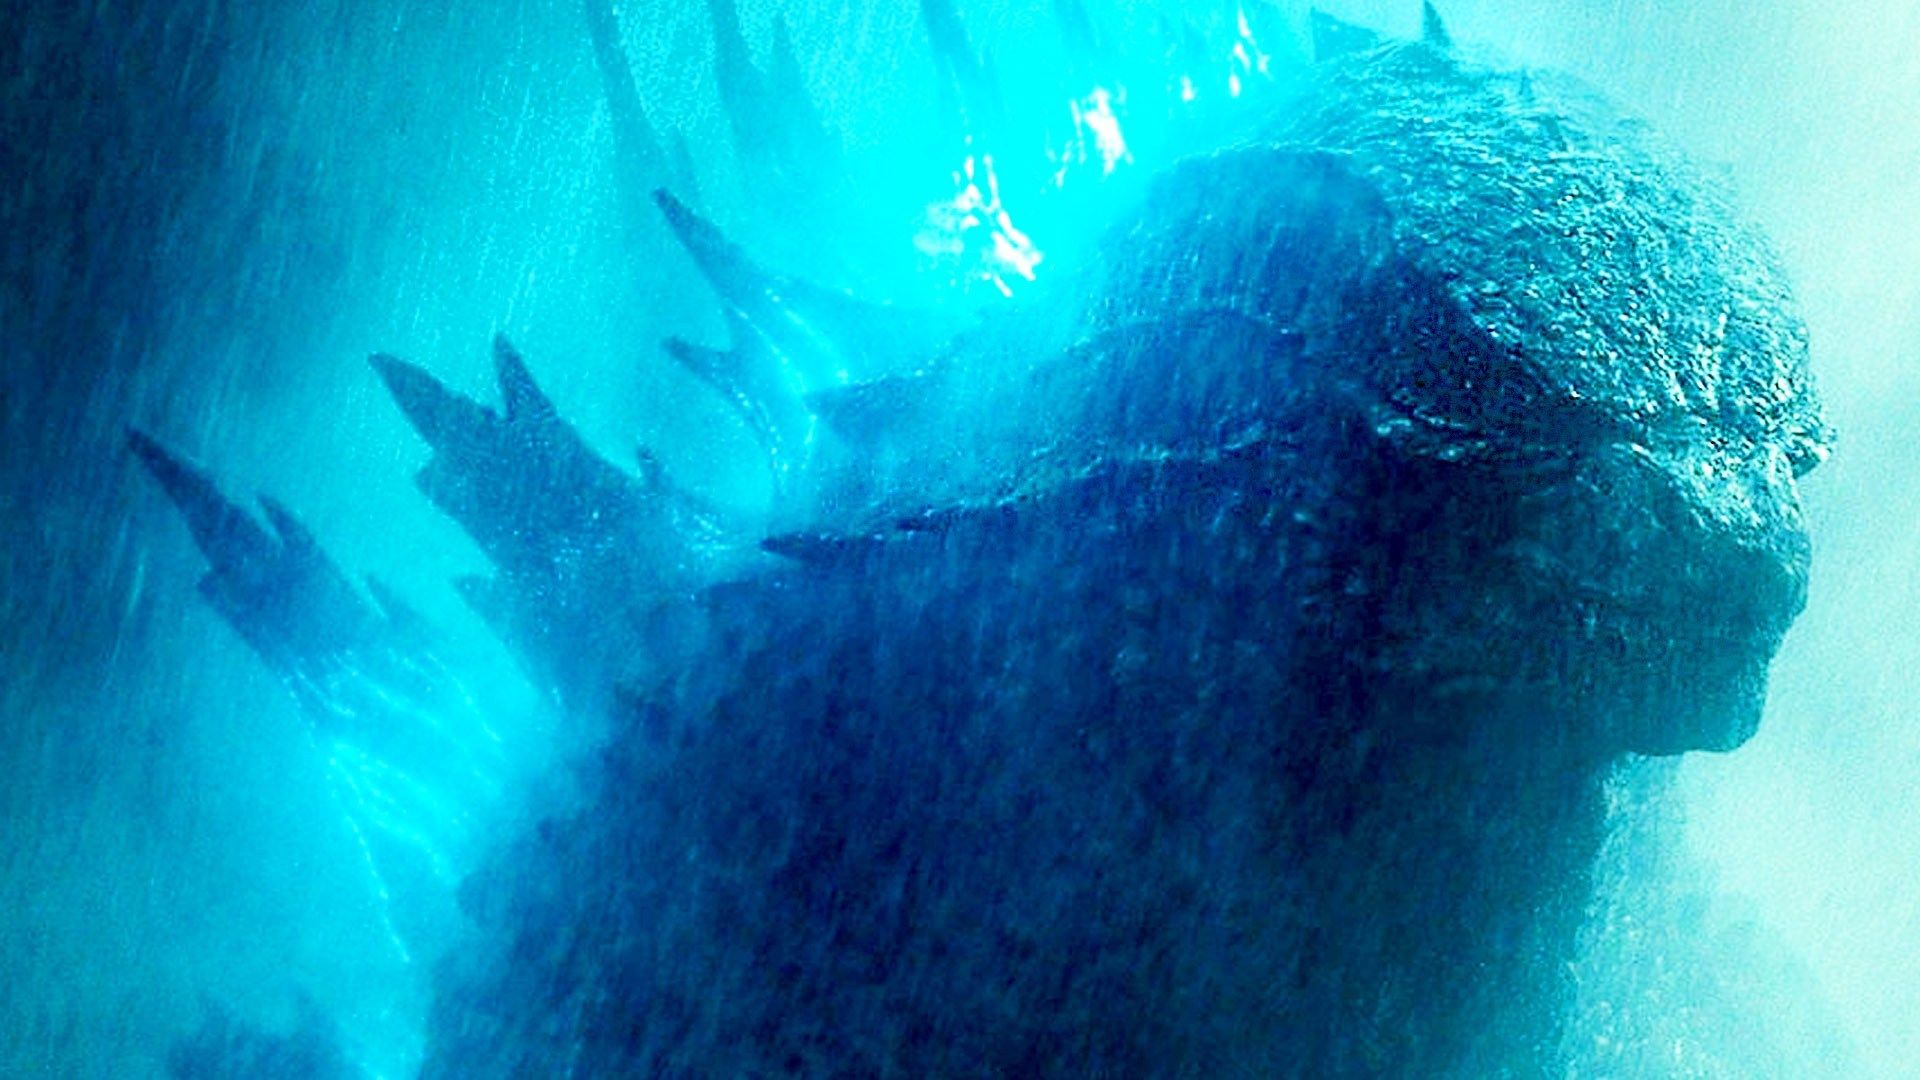 Godzilla: King of the Monsters review: A monster fraud. Ready